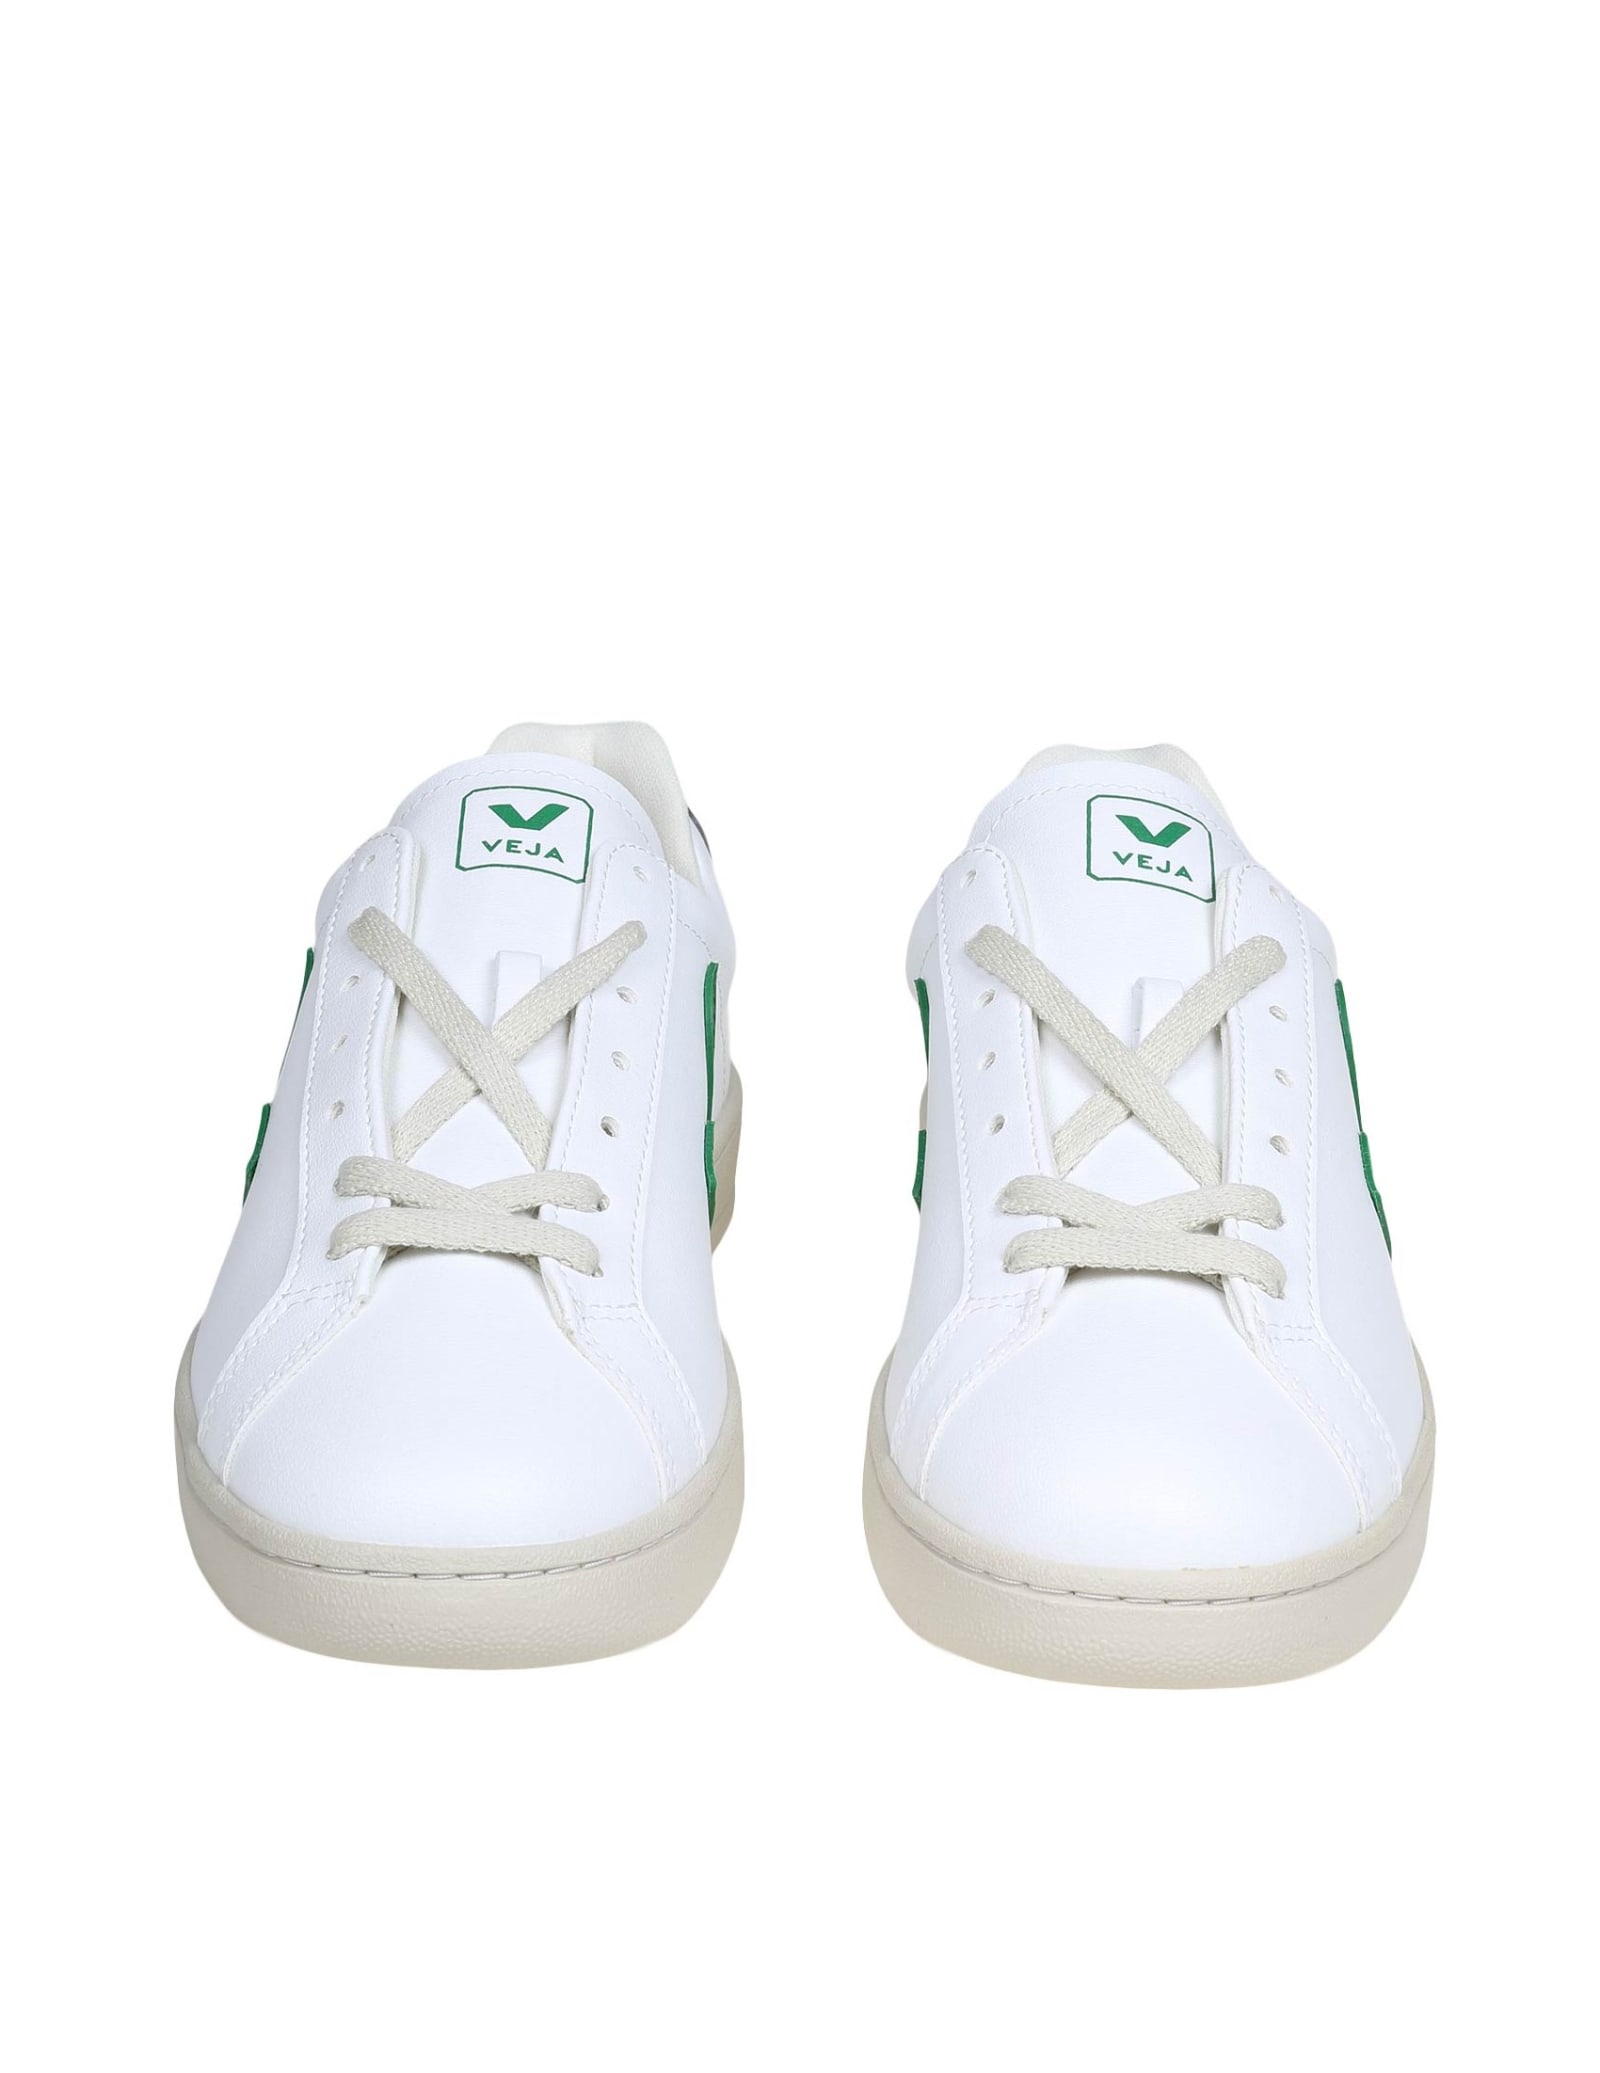 Shop Veja Urca Sneakers In White And Green Leather